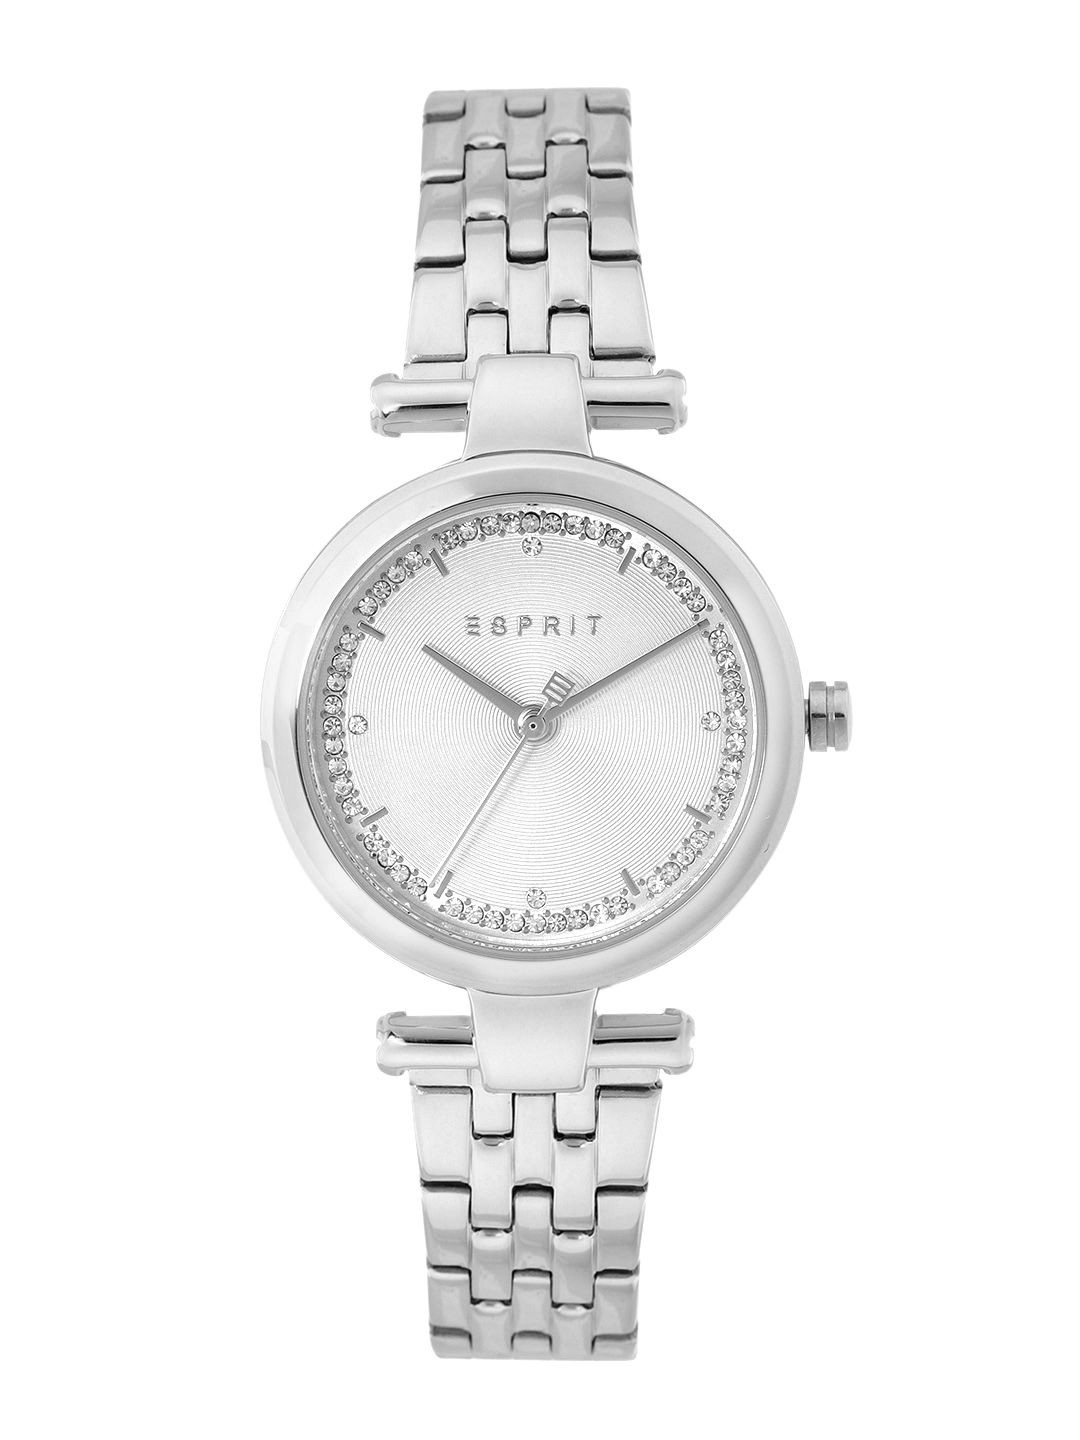 ESPRIT Women Silver-Toned Dial & Bracelet Style Straps Analogue Watch ES1L203M0065 Price in India